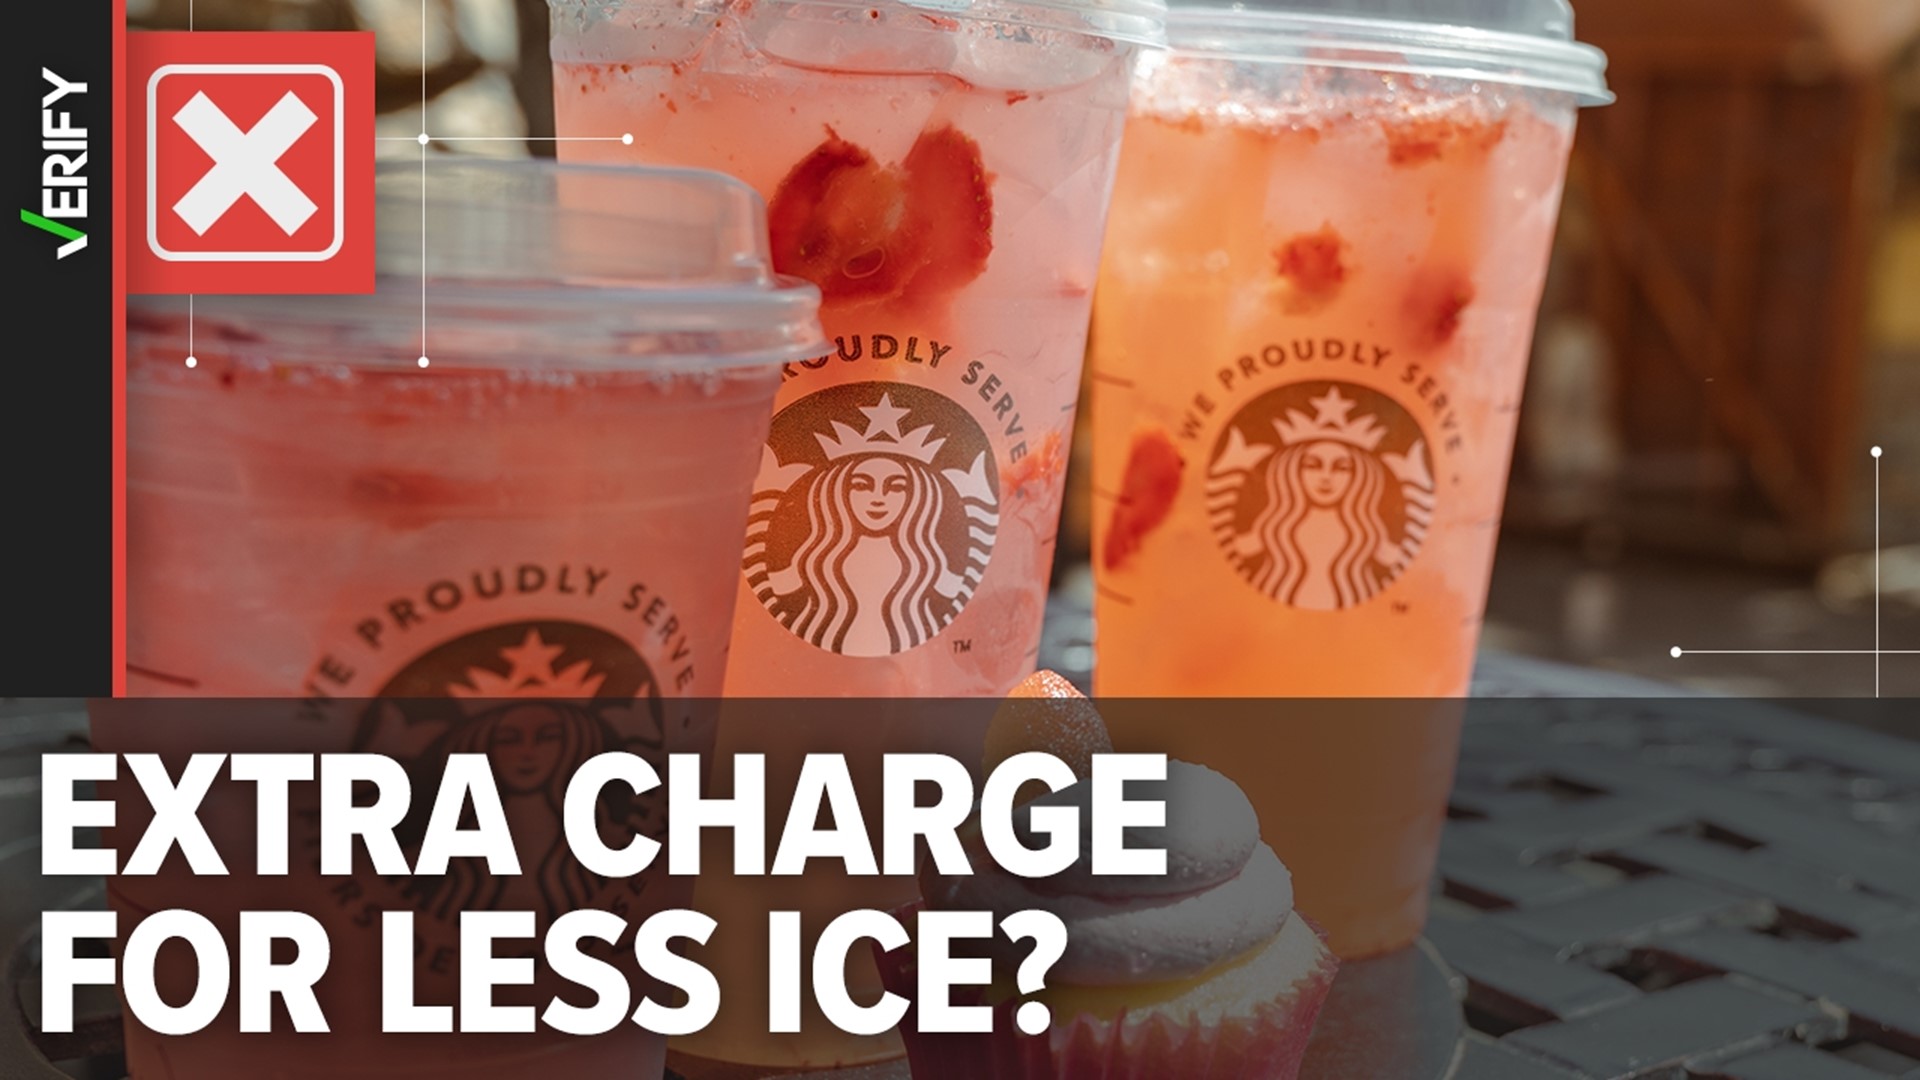 Posts claim Starbucks is charging customers who request light or no ice, but this new $1 fee only applies to Refreshers drinks that are customized with no water.